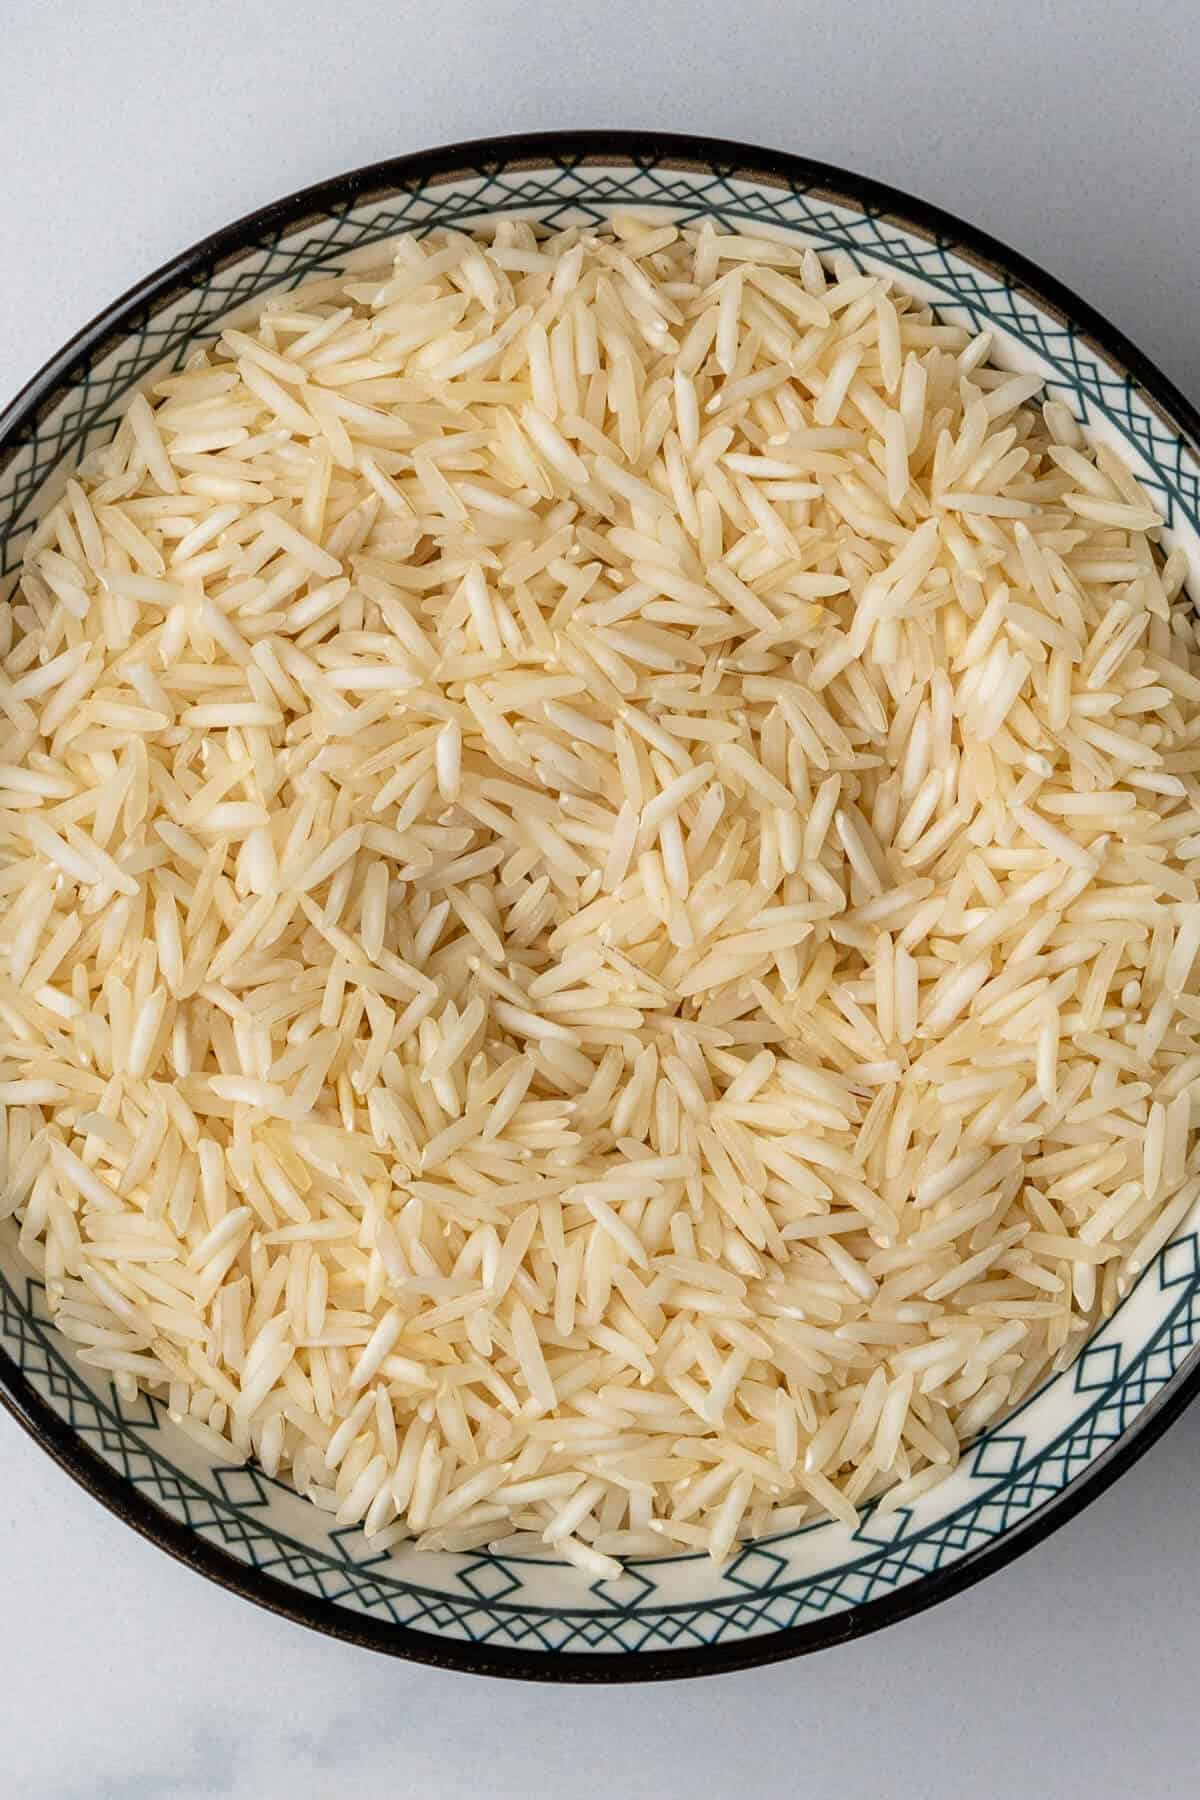 Basmati rice in a bowl before being cooked